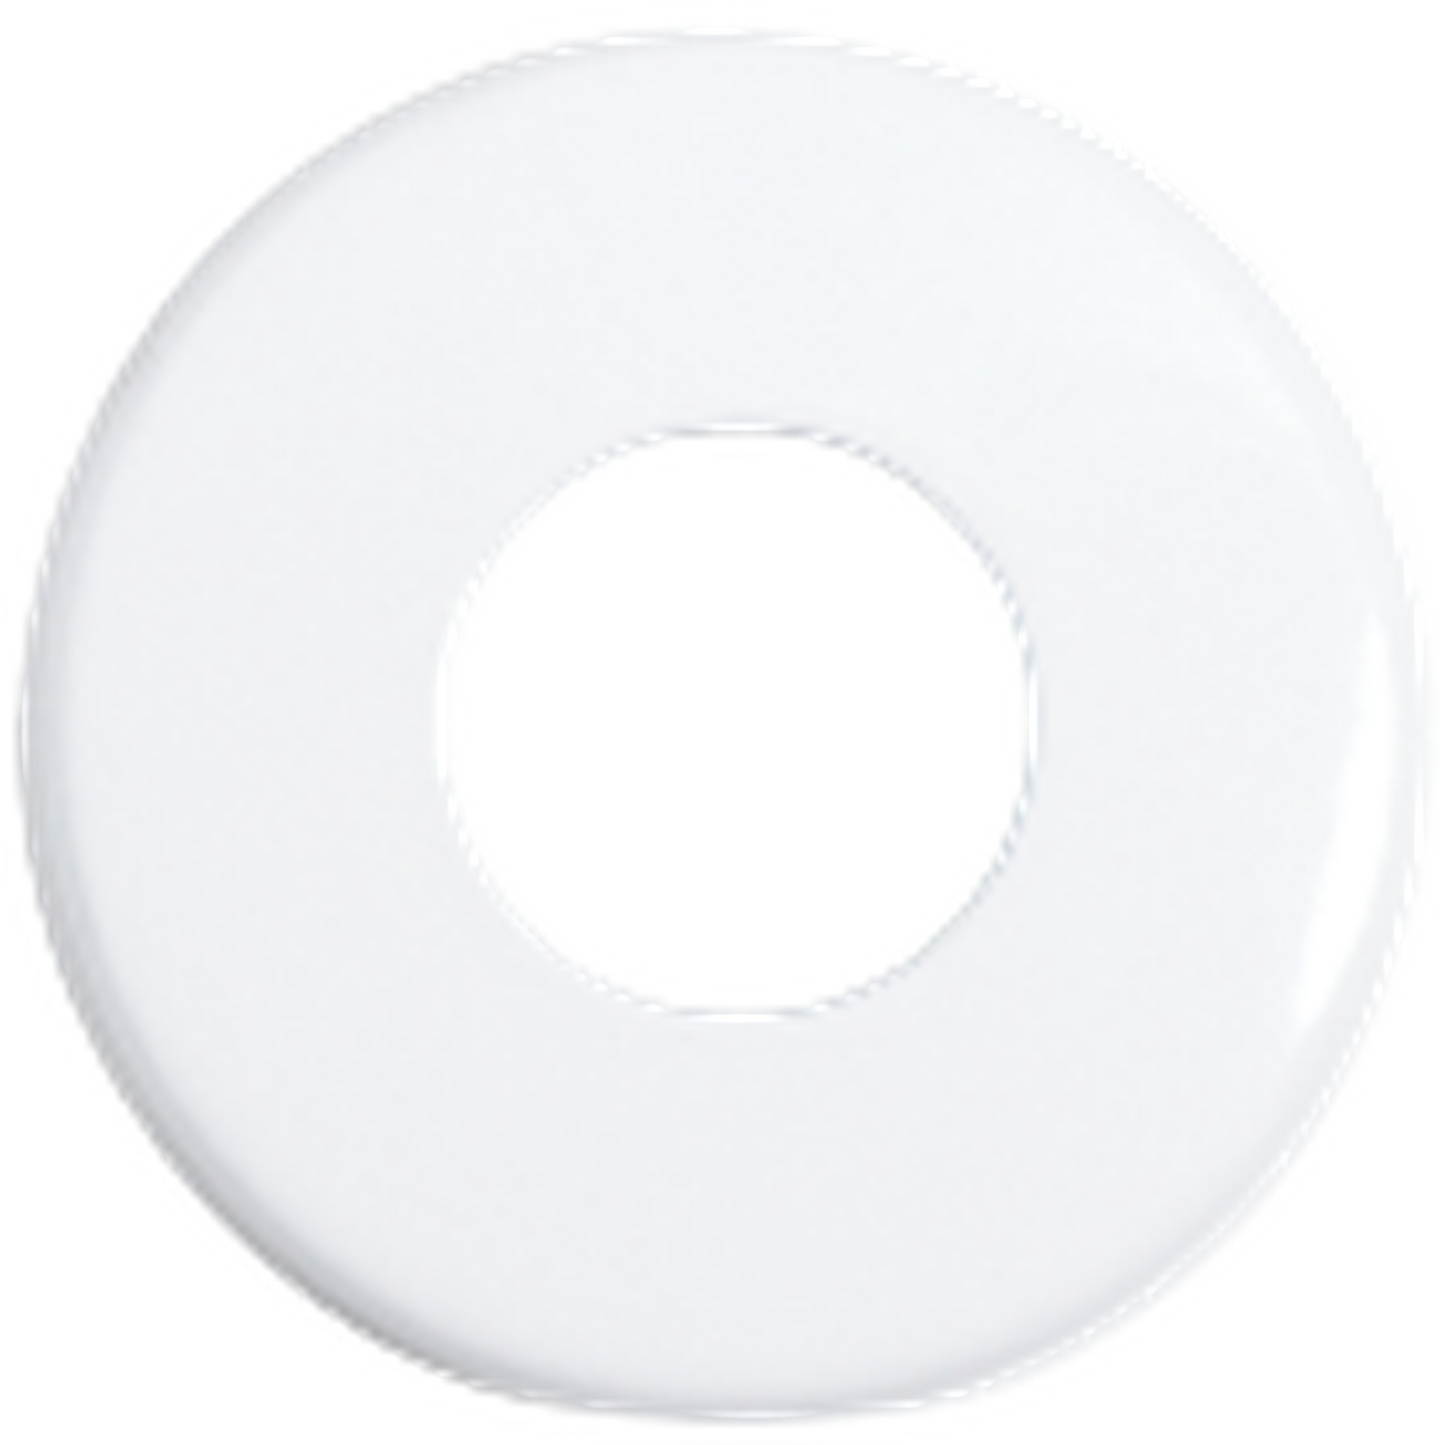 Seachrome Signature Series 2.5" Diameter White Wrinkle Powder Coat Concealed Mounting Flange and Bracket Set for Shower Rod